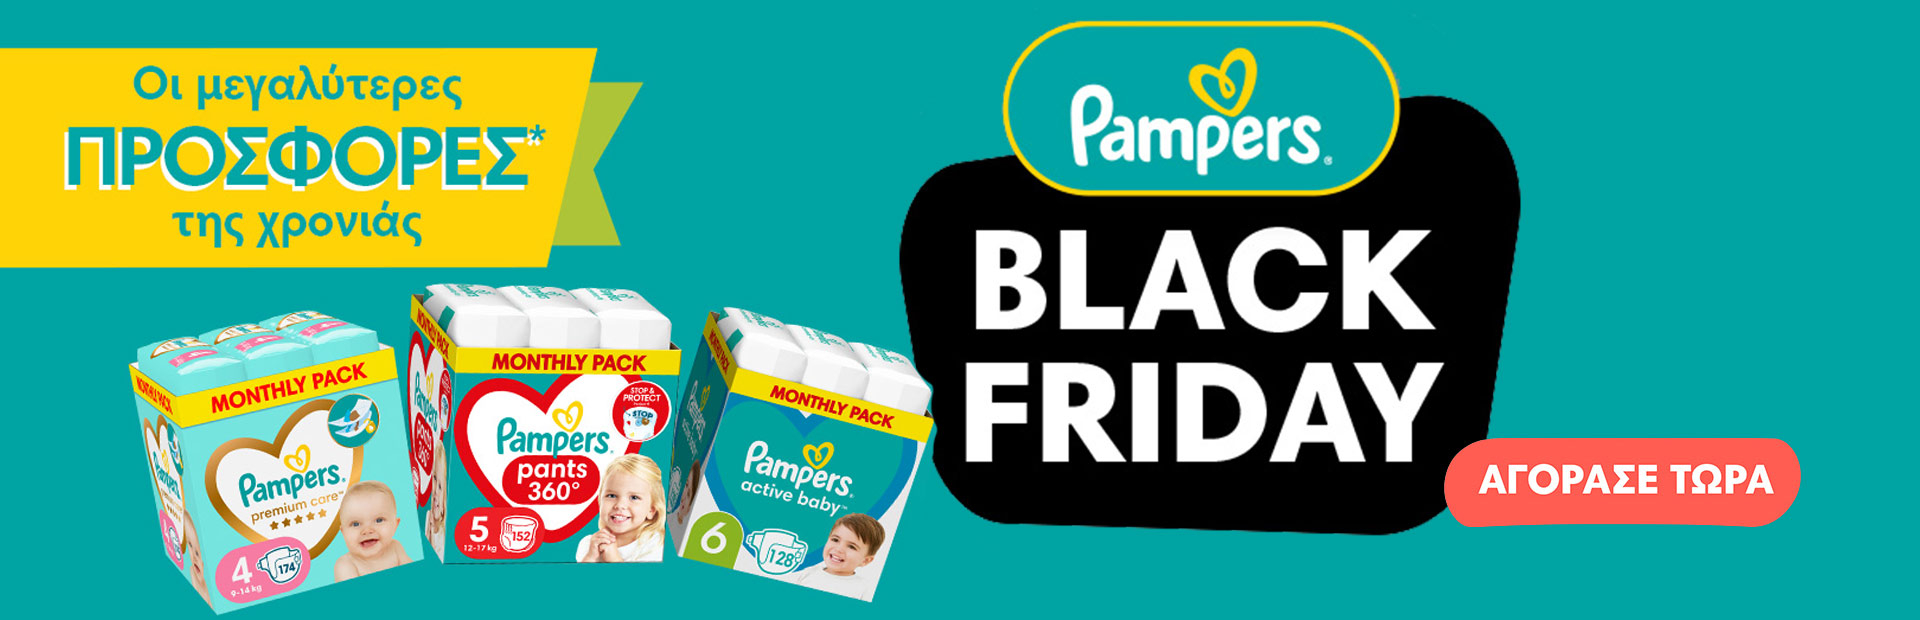 Black Friday Pampers